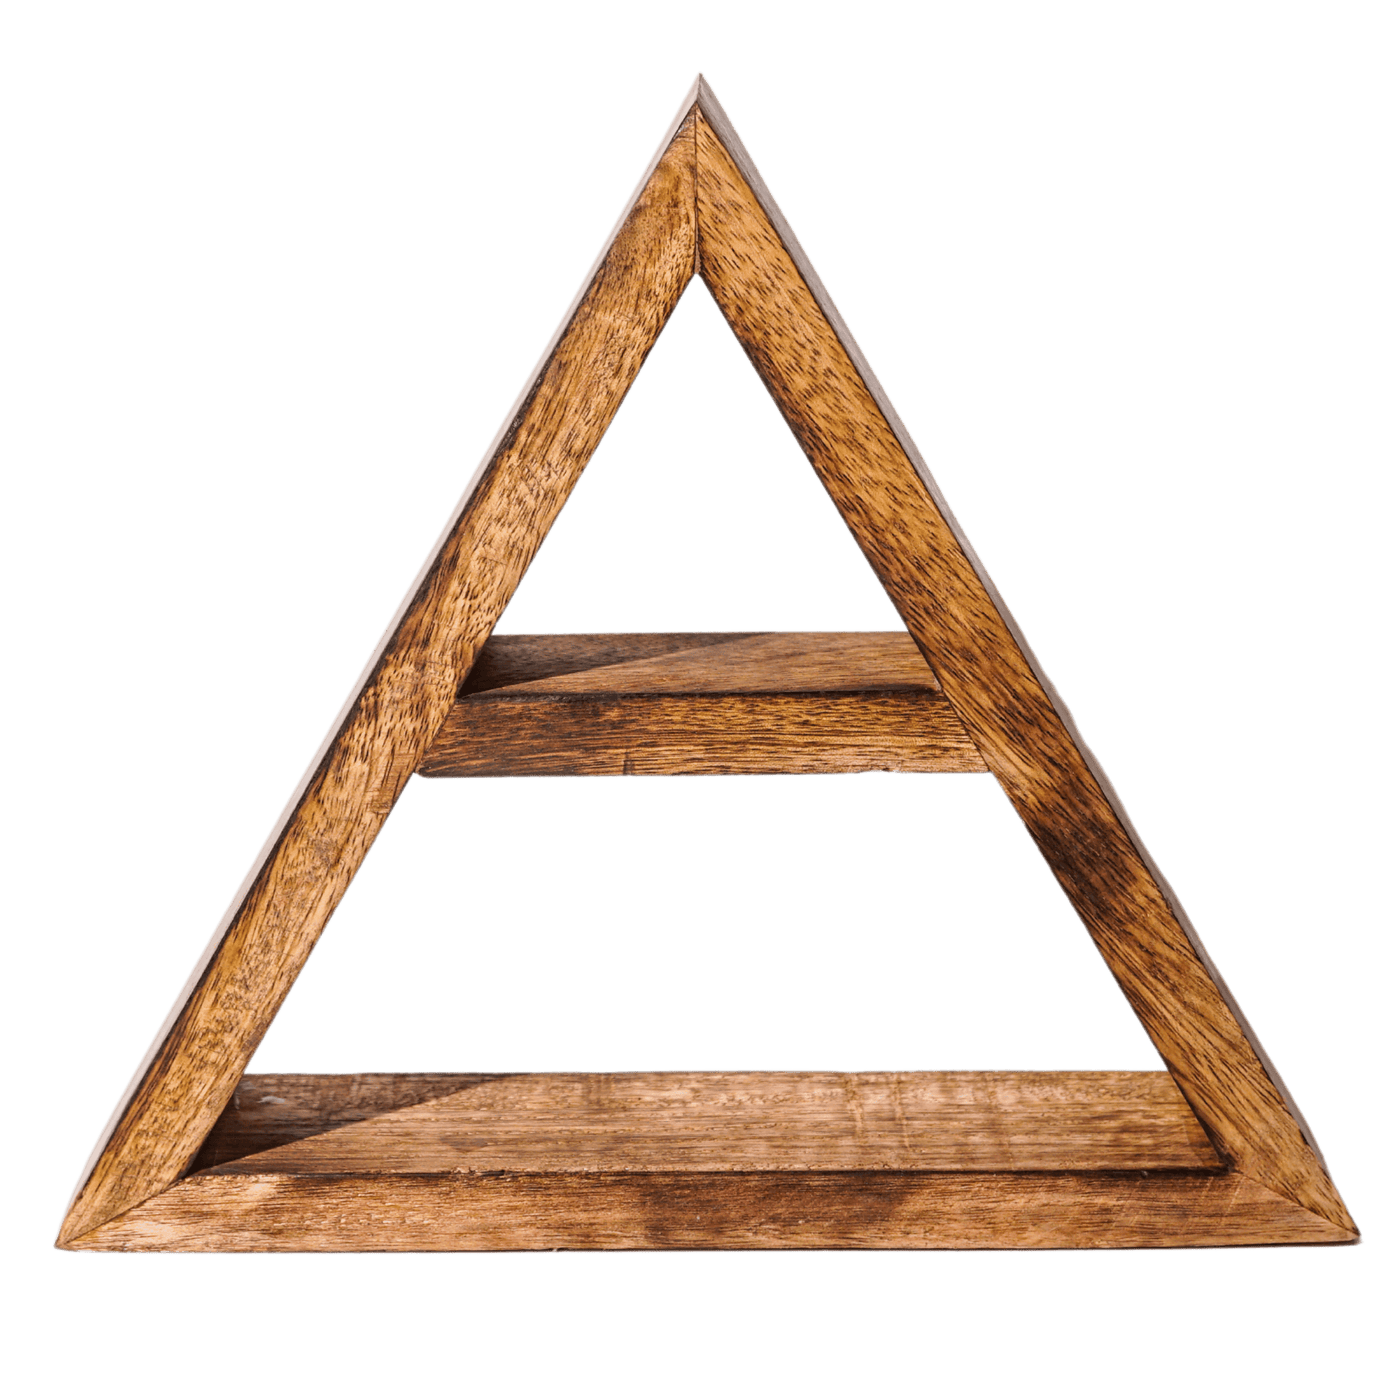 triangular pyramid display shelf for crystals from Energy Muse 